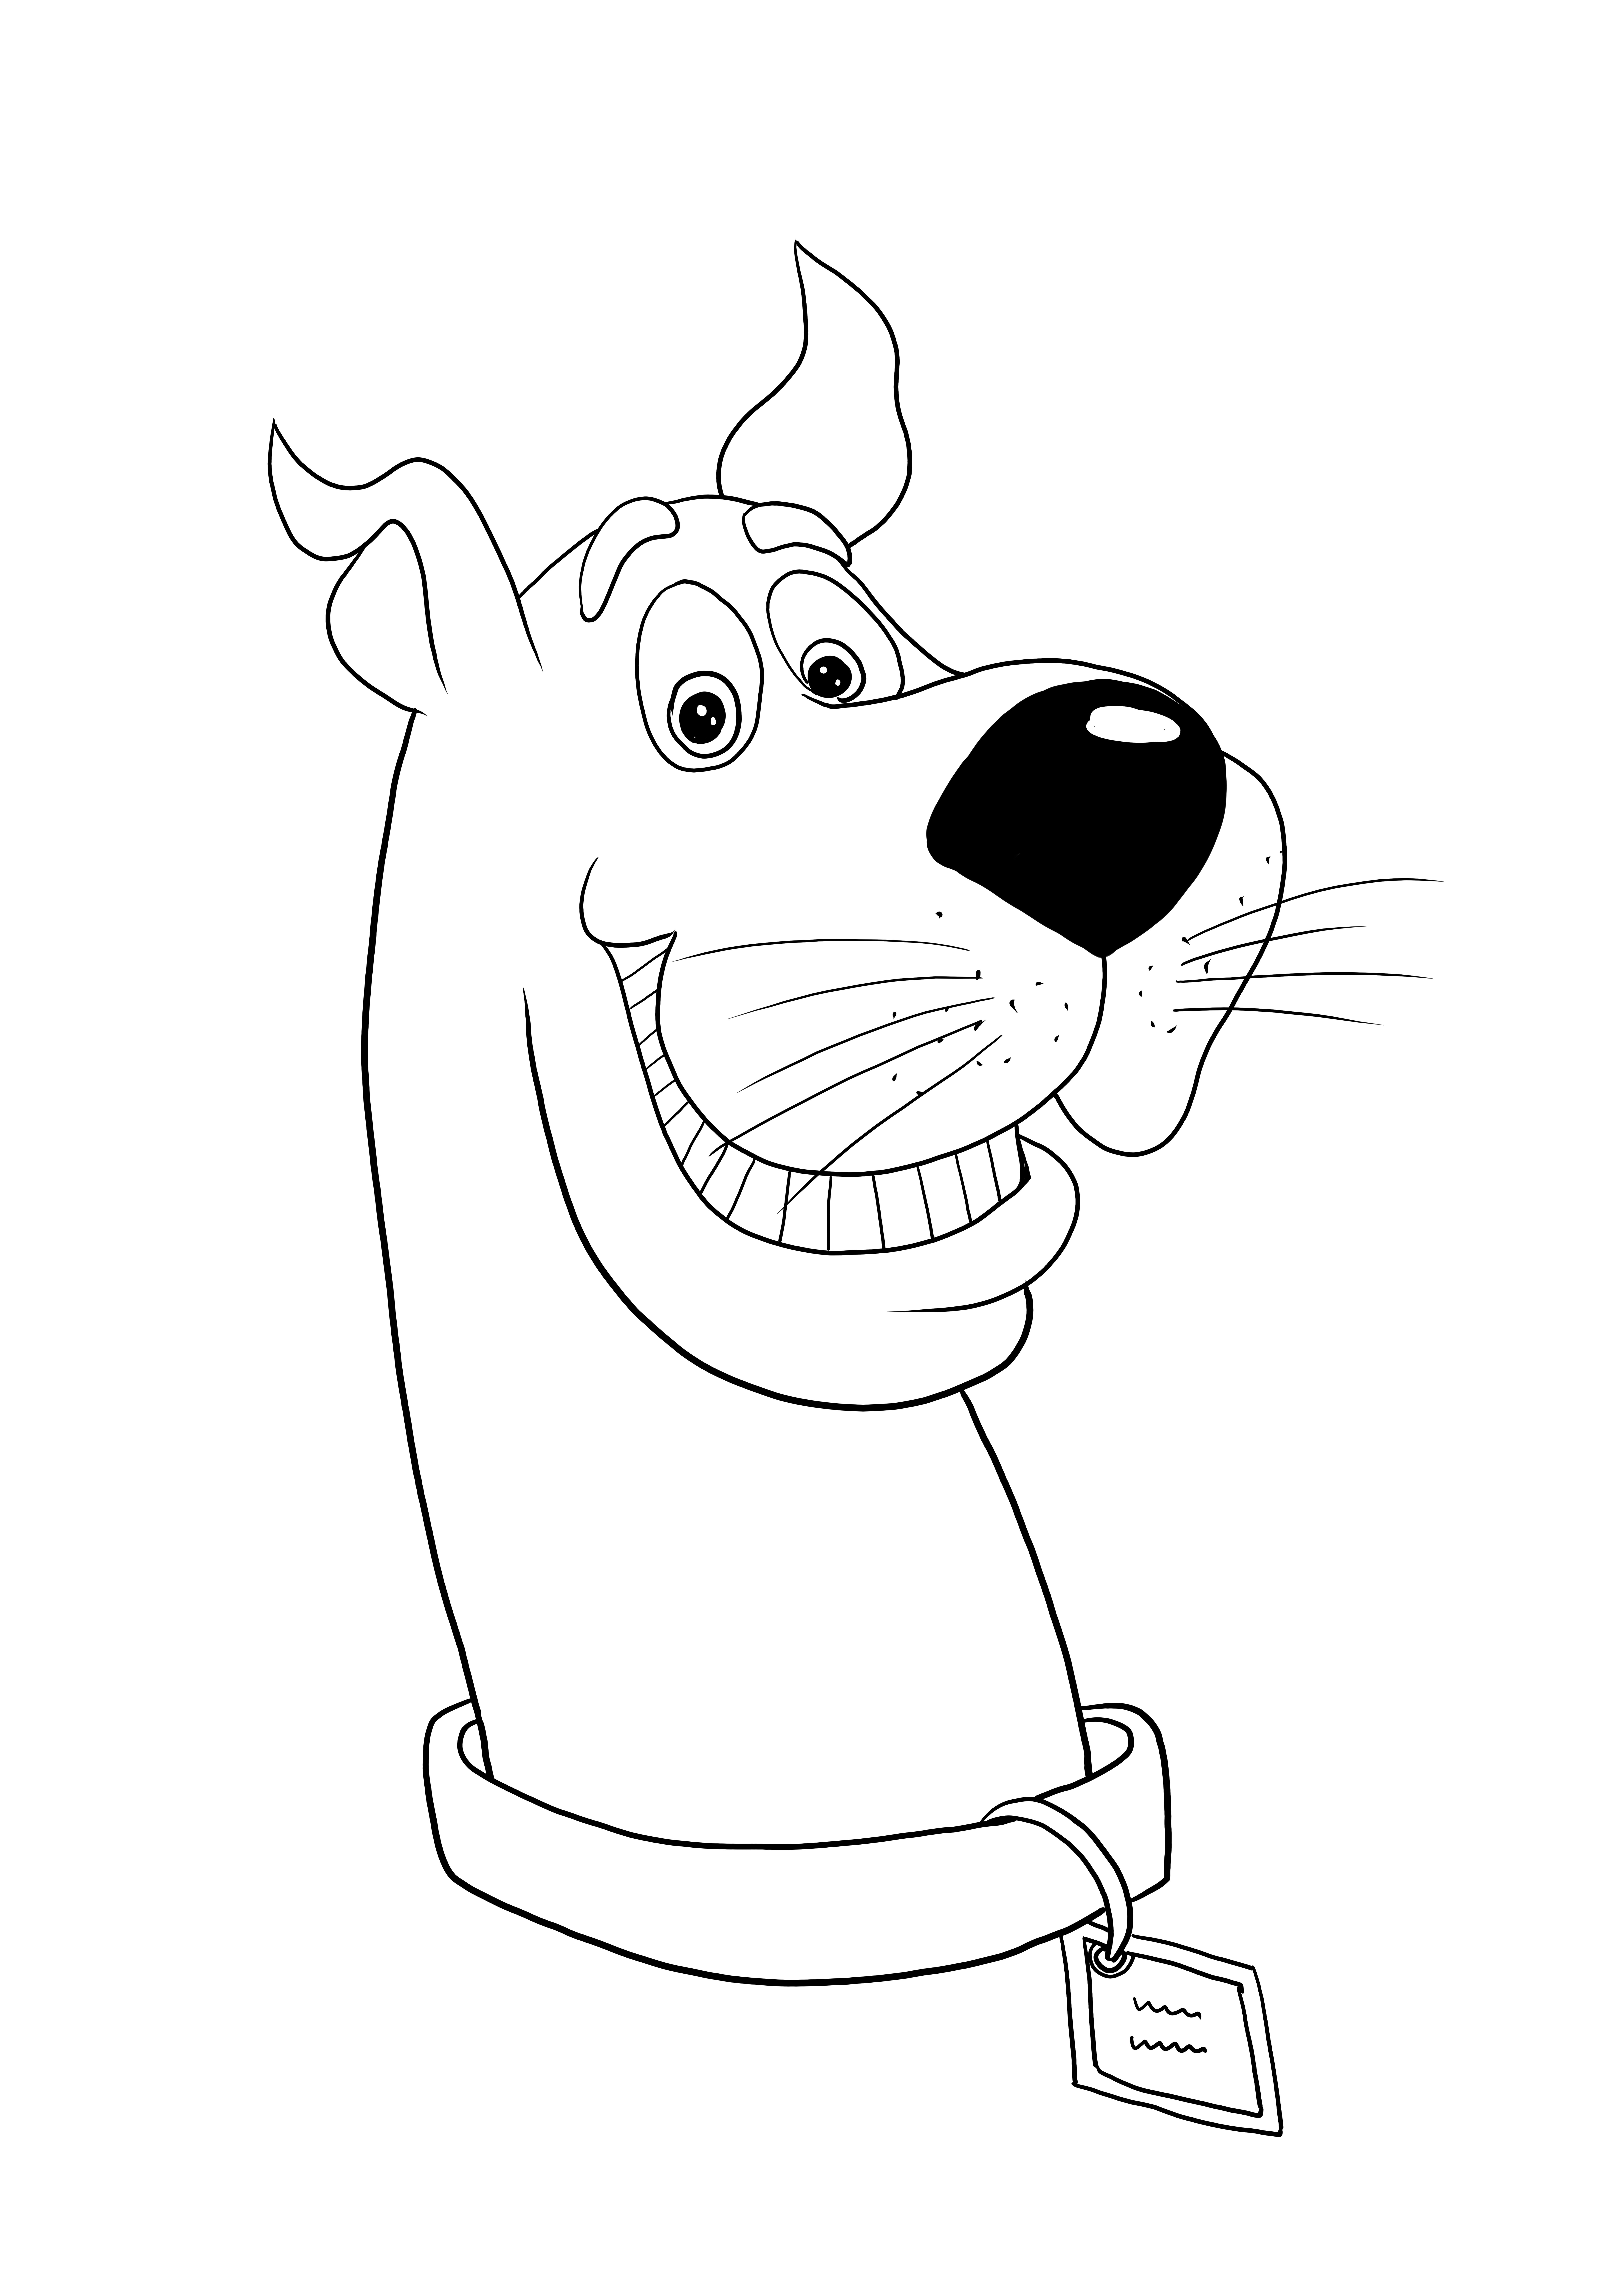 Happy face Scooby Doo cartoon free printable picture to color